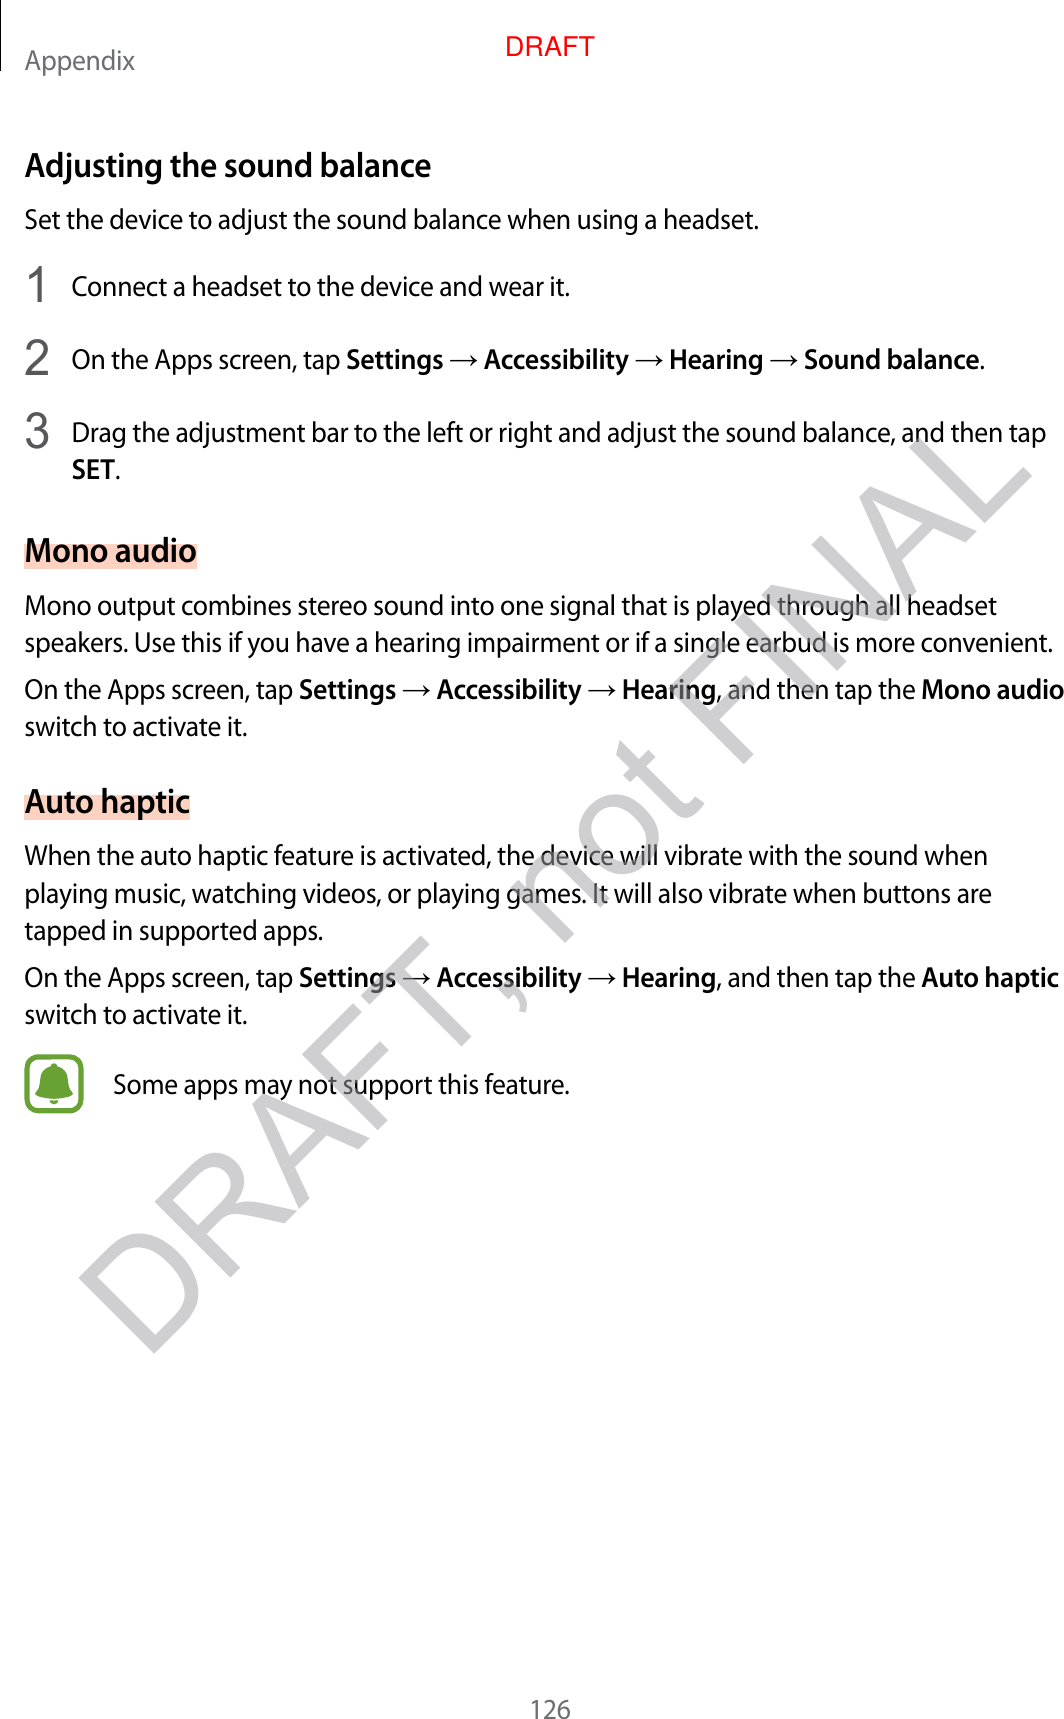 Appendix126Adjusting the sound balanceSet the device to adjust the sound balance when using a headset.1  Connect a headset to the device and wear it.2  On the Apps screen, tap Settings  Accessibility  Hearing  Sound balance.3  Drag the adjustment bar to the left or right and adjust the sound balance, and then tap SET.Mono audioMono output combines stereo sound into one signal that is played through all headset speakers. Use this if you have a hearing impairment or if a single earbud is more convenient.On the Apps screen, tap Settings  Accessibility  Hearing, and then tap the Mono audio switch to activate it.Auto hapticWhen the auto haptic feature is activated, the device will vibrate with the sound when playing music, watching videos, or playing games. It will also vibrate when buttons are tapped in supported apps.On the Apps screen, tap Settings  Accessibility  Hearing, and then tap the Auto haptic switch to activate it.Some apps may not support this feature.DRAFT, not FINALDRAFT